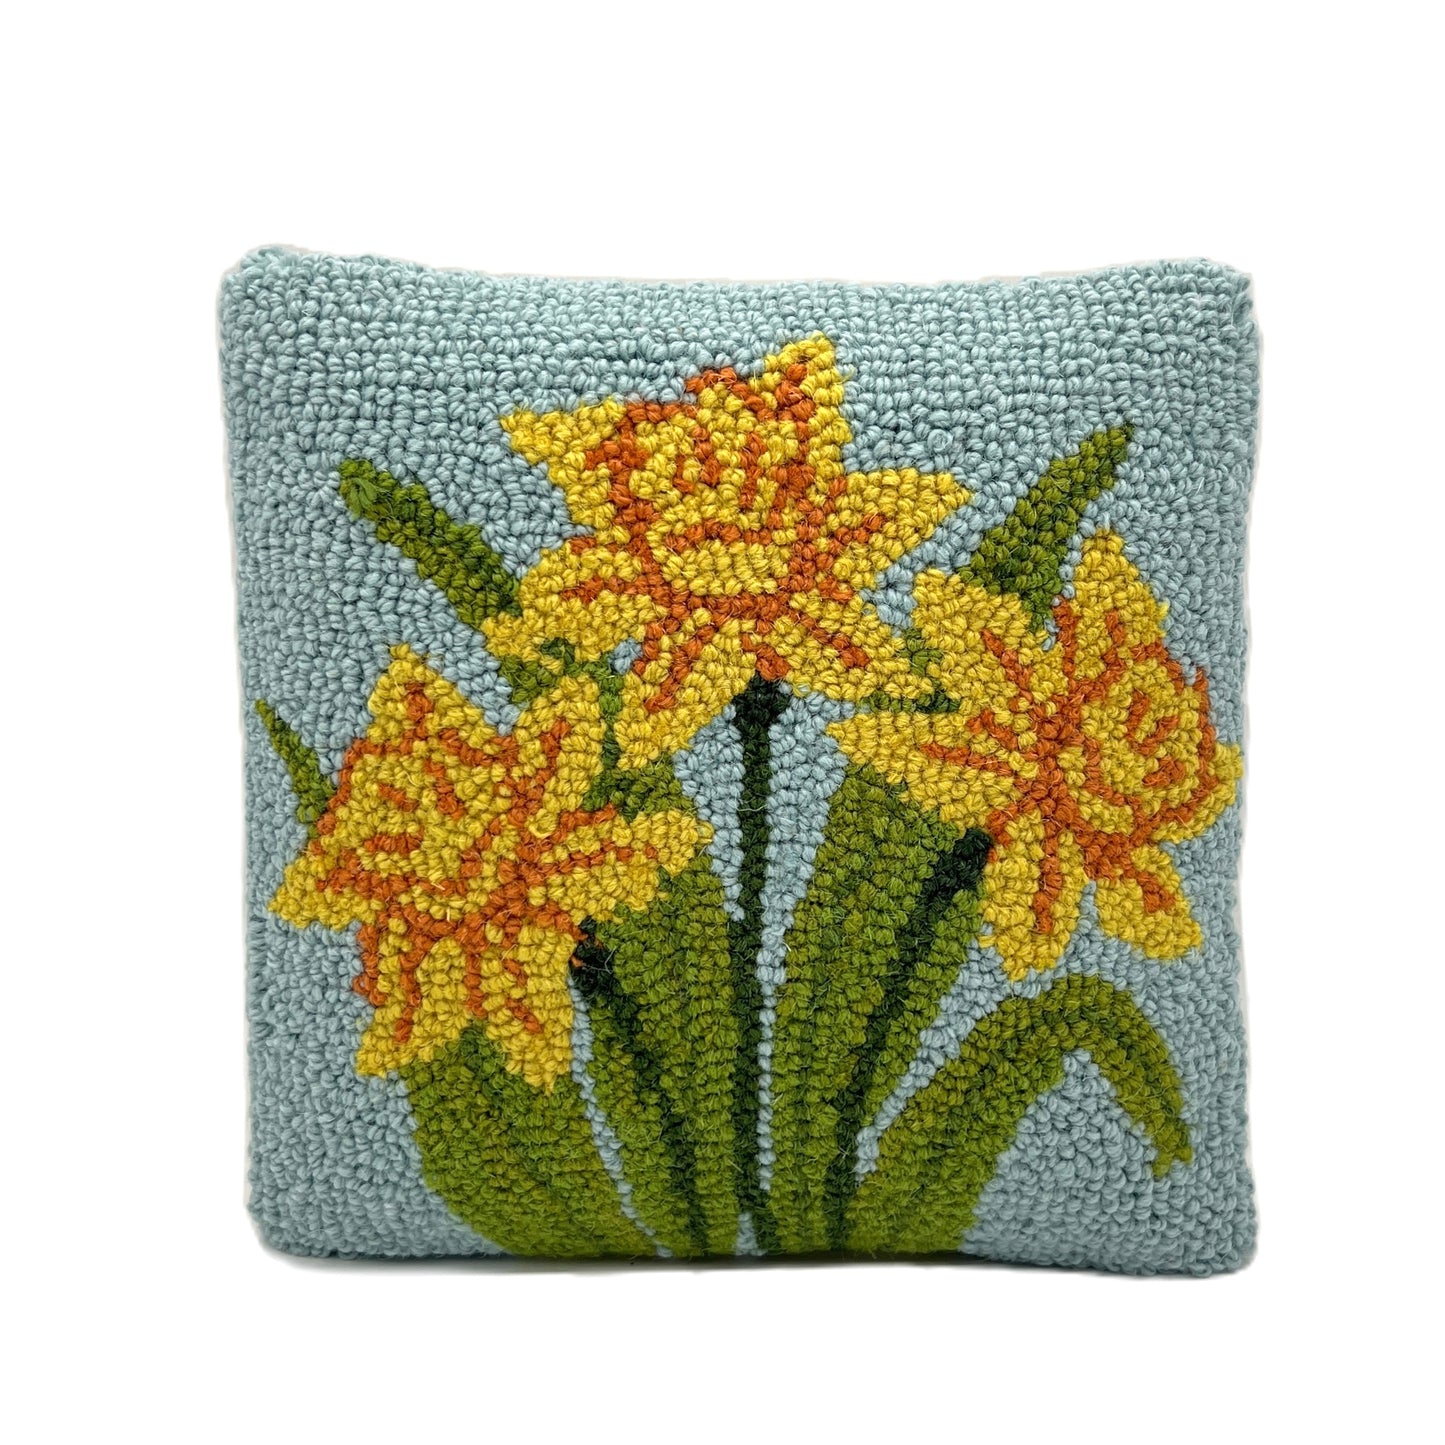 Daffodil Wool Hooked Pillow Pillow 1818 Farms   